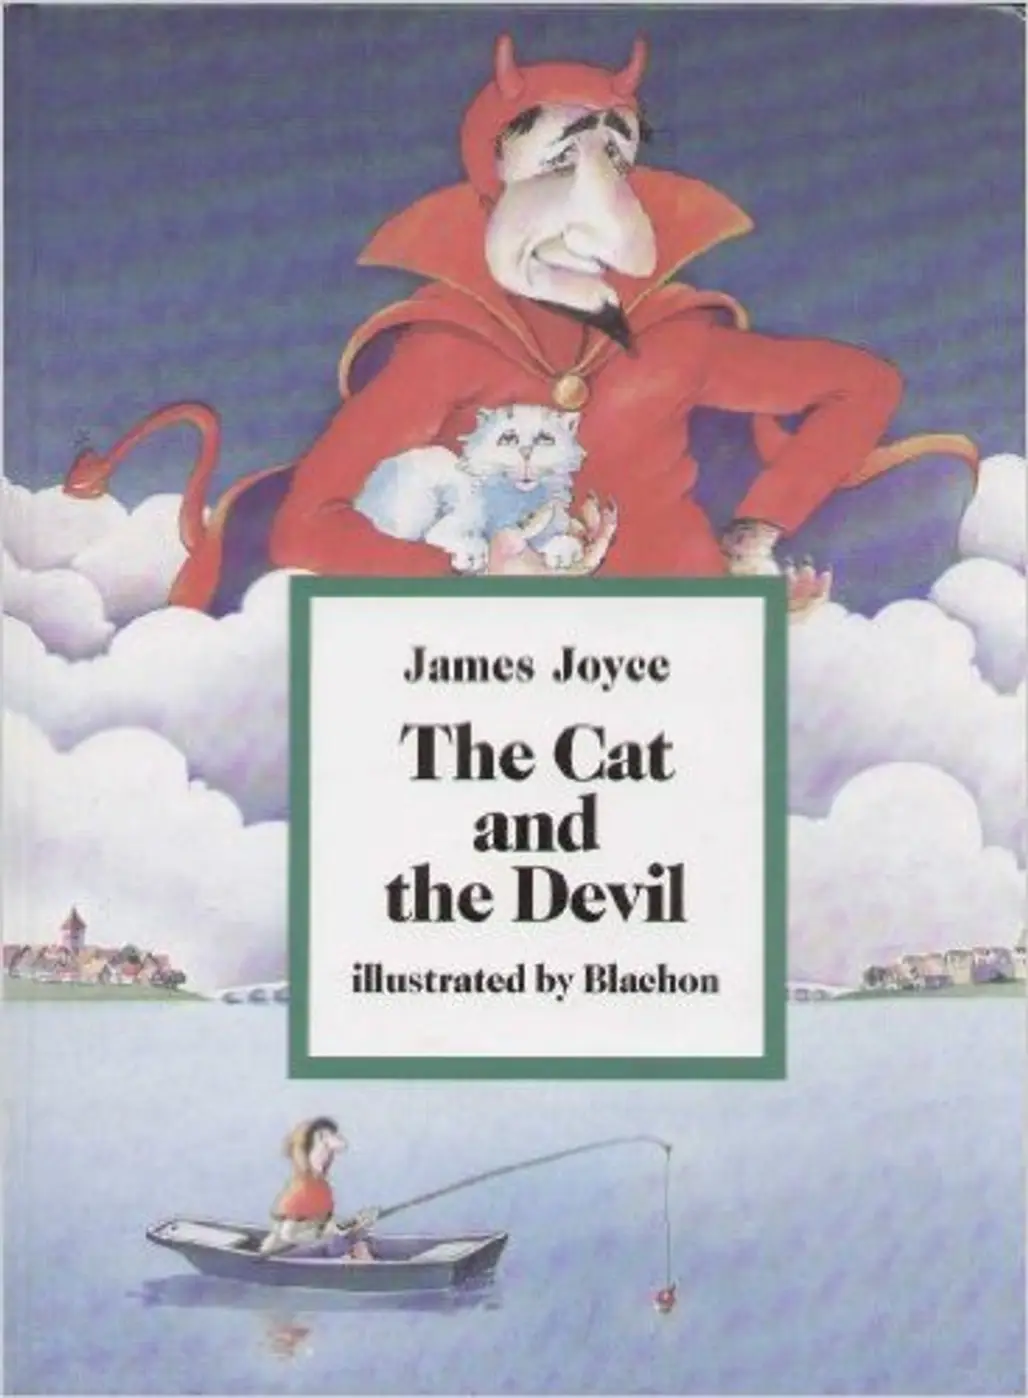 The Cat and the Devil (James Joyce)